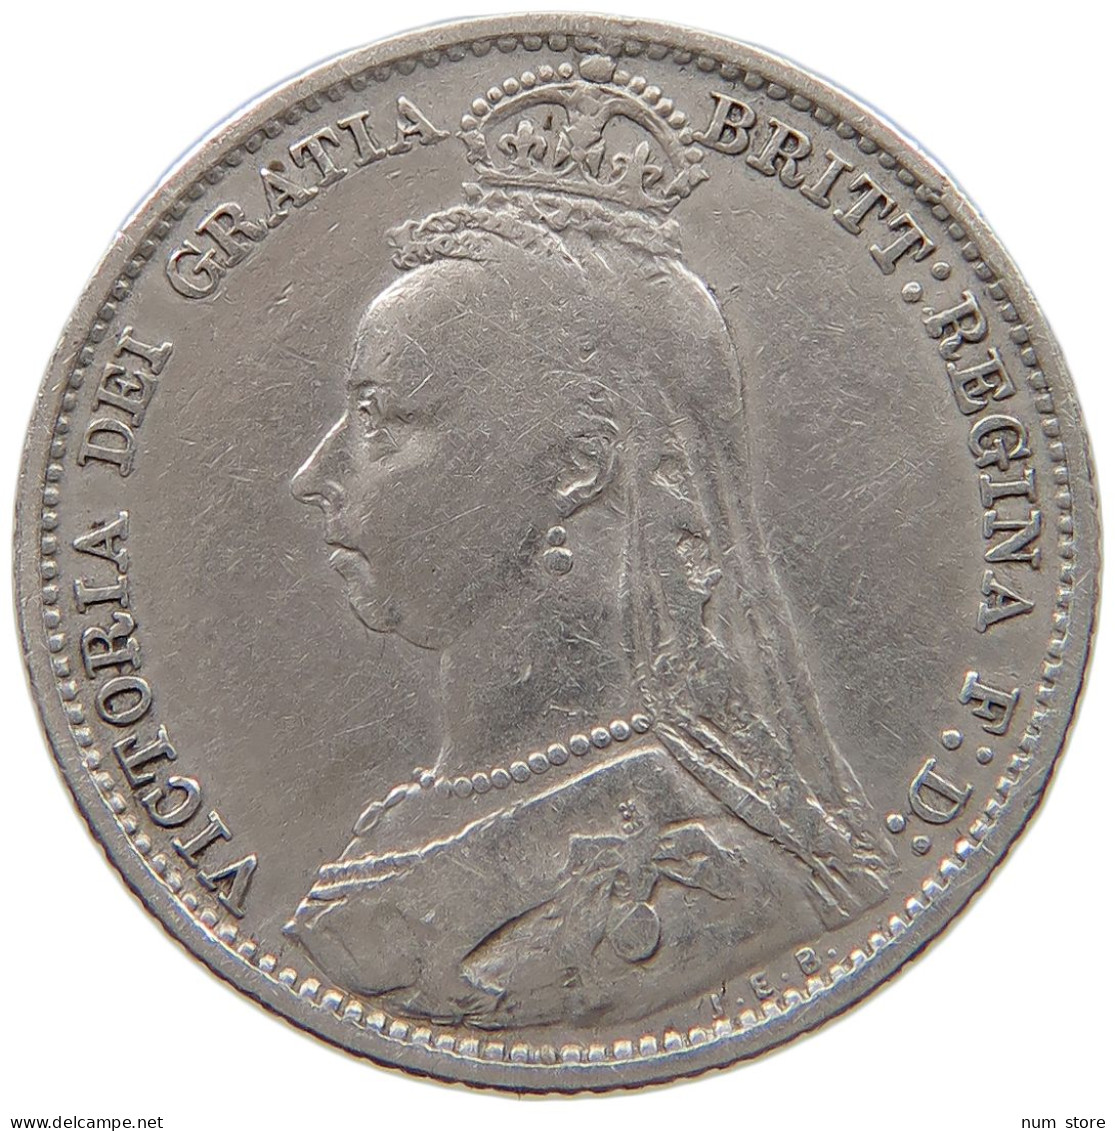 GREAT BRITAIN SIXPENCE 1892 Victoria 1837-1901 #c040 0399 - H. 6 Pence